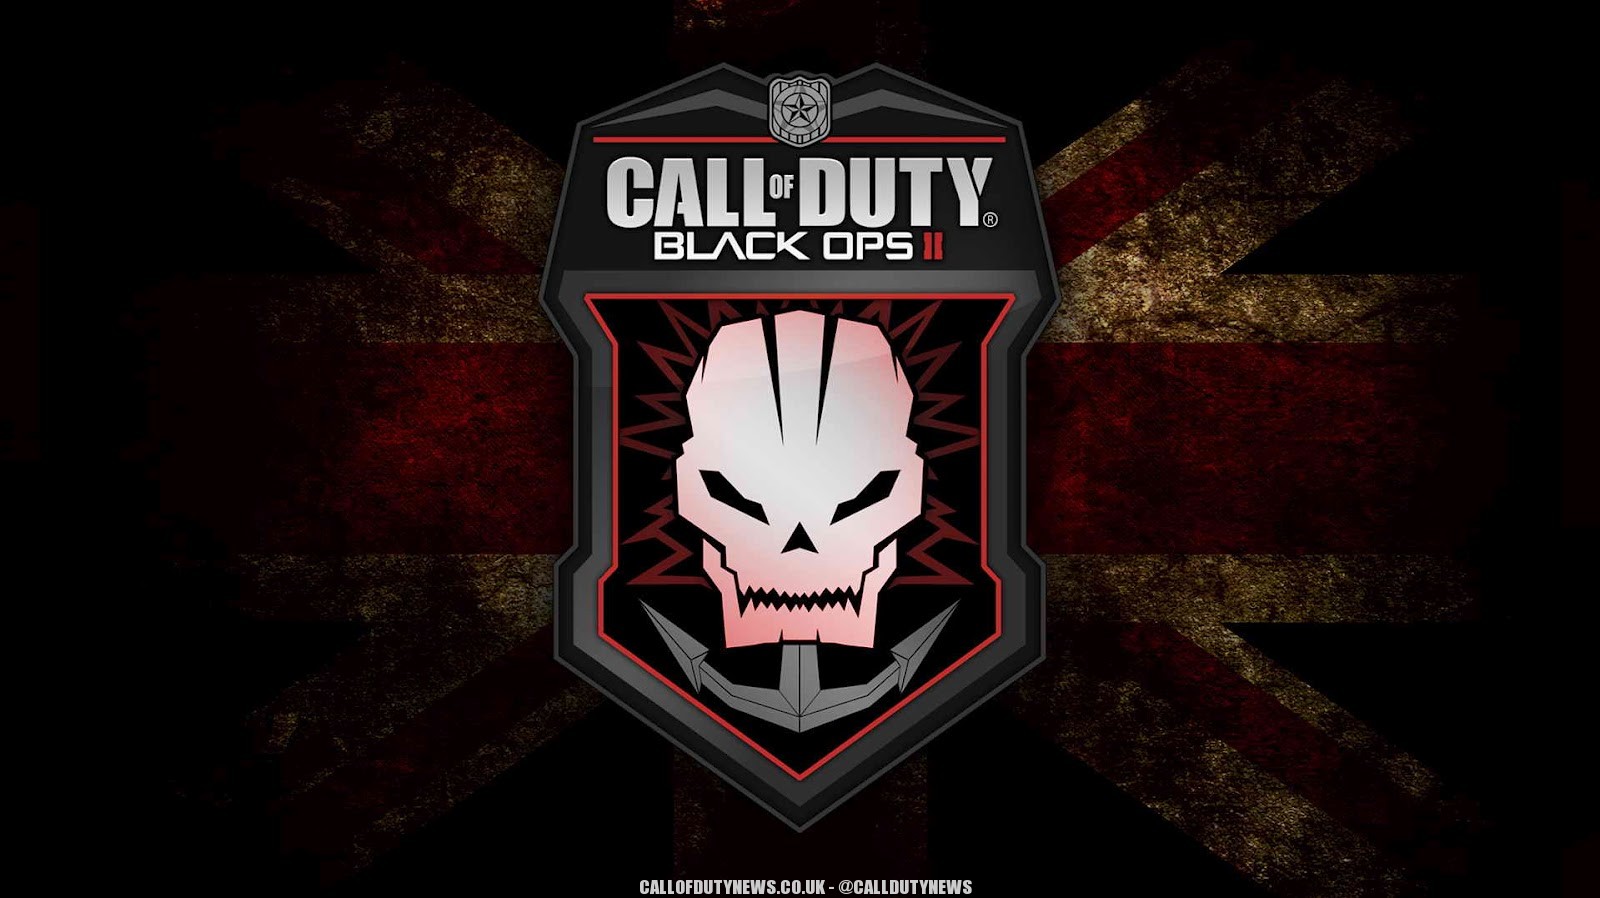 150 Black Ops 2 Wallpapers [SINGLE DOWNLOAD LINK] | Call of Duty Blog